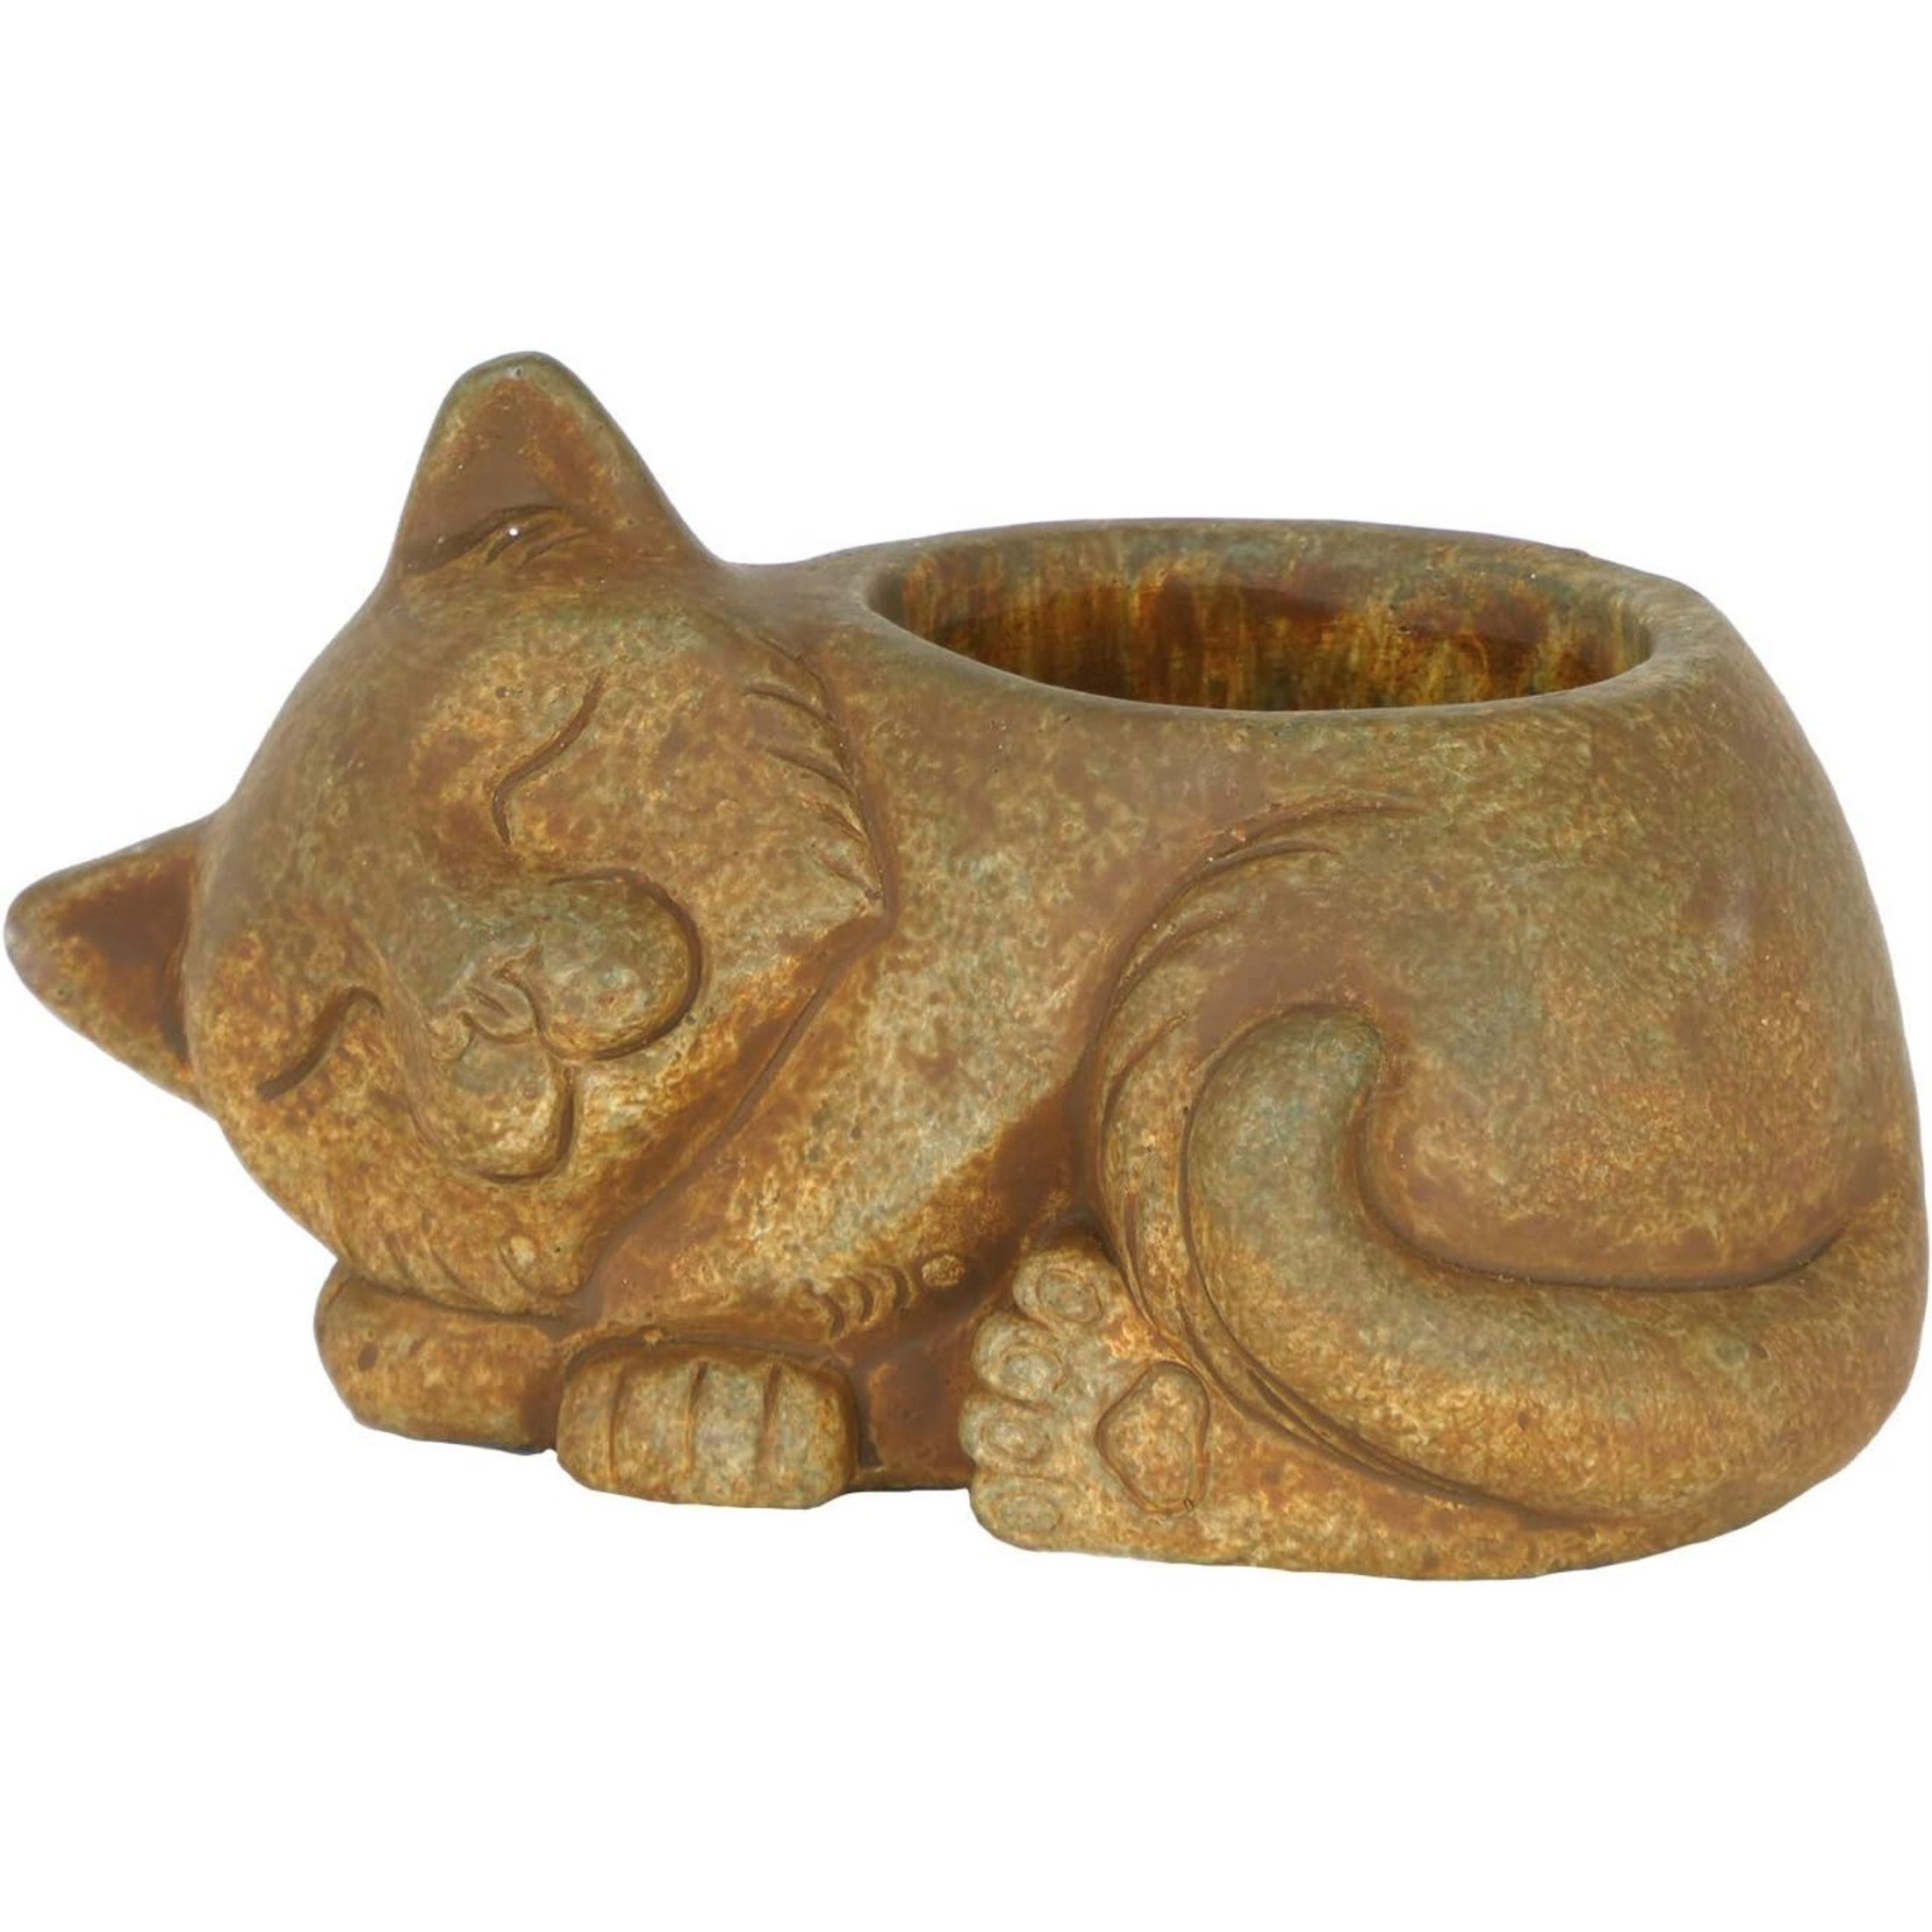 Classic Home and Garden Cement Buddies Indoor Outdoor Planter with Drainage Hole, Sleeping Cat